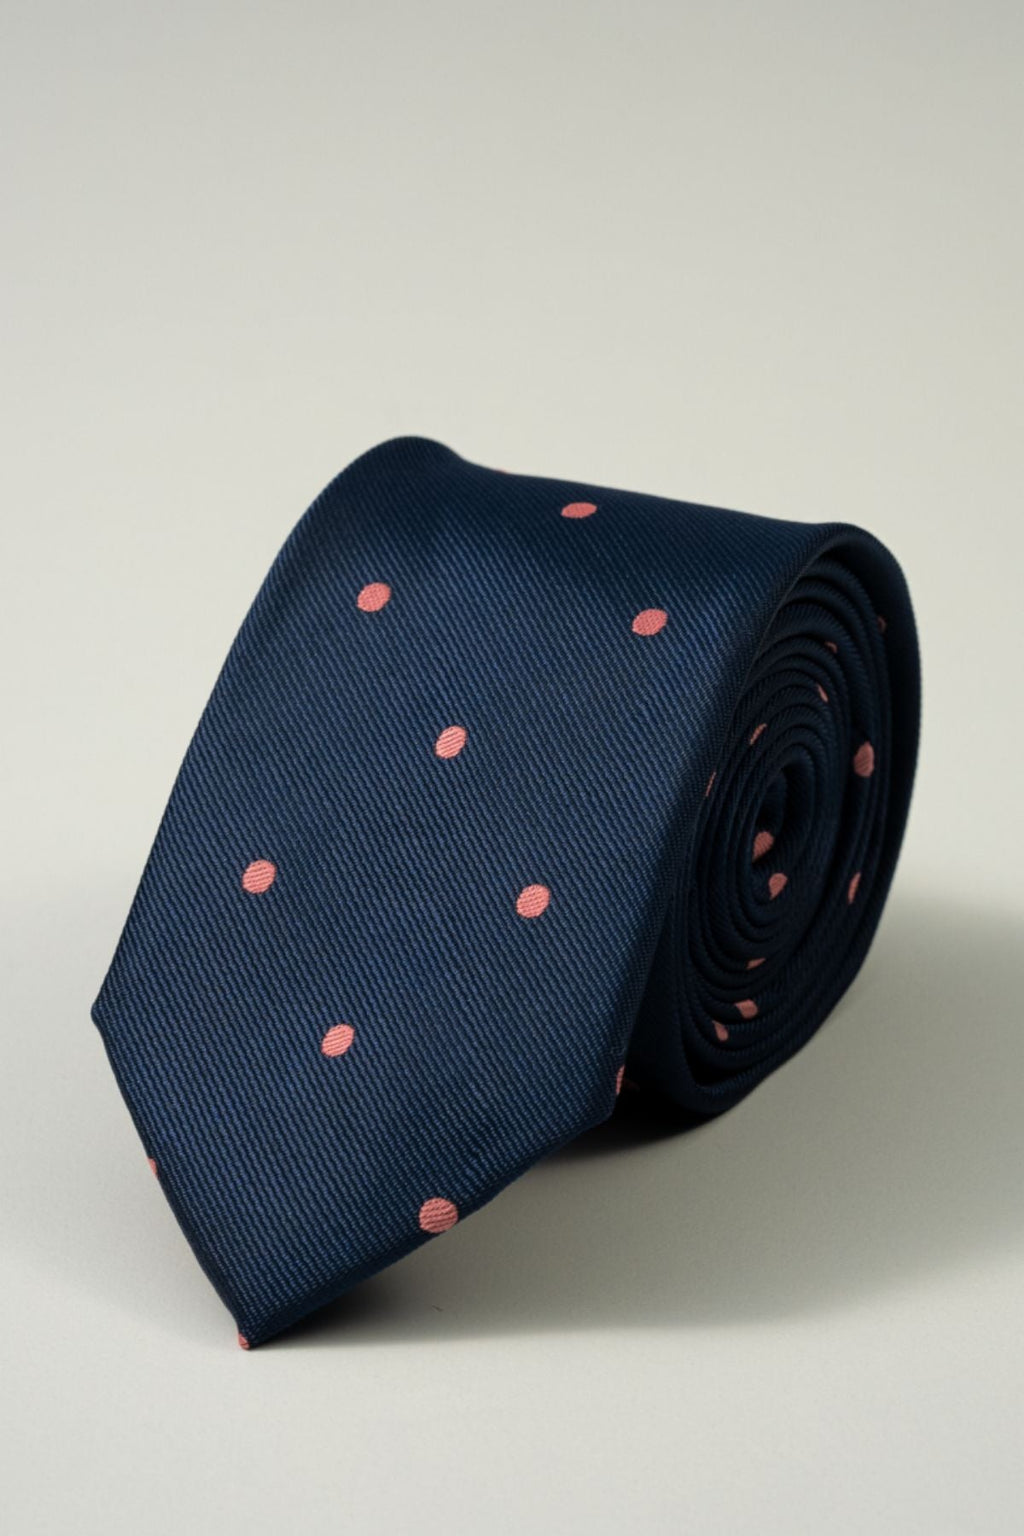 Tie - Navy Dotted